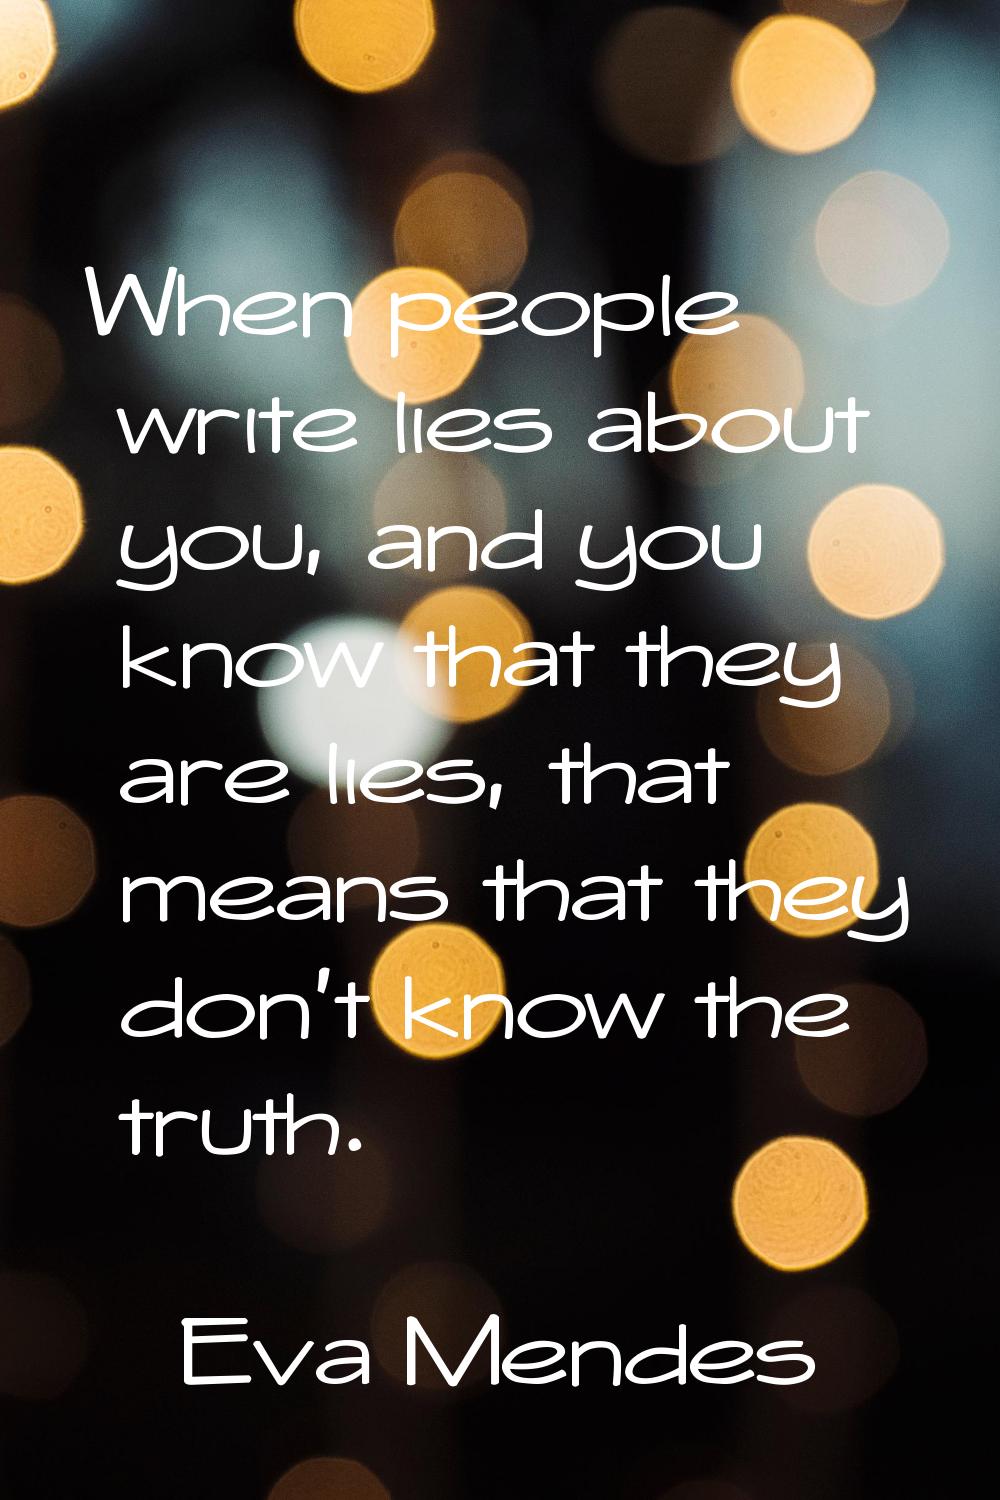 When people write lies about you, and you know that they are lies, that means that they don't know 